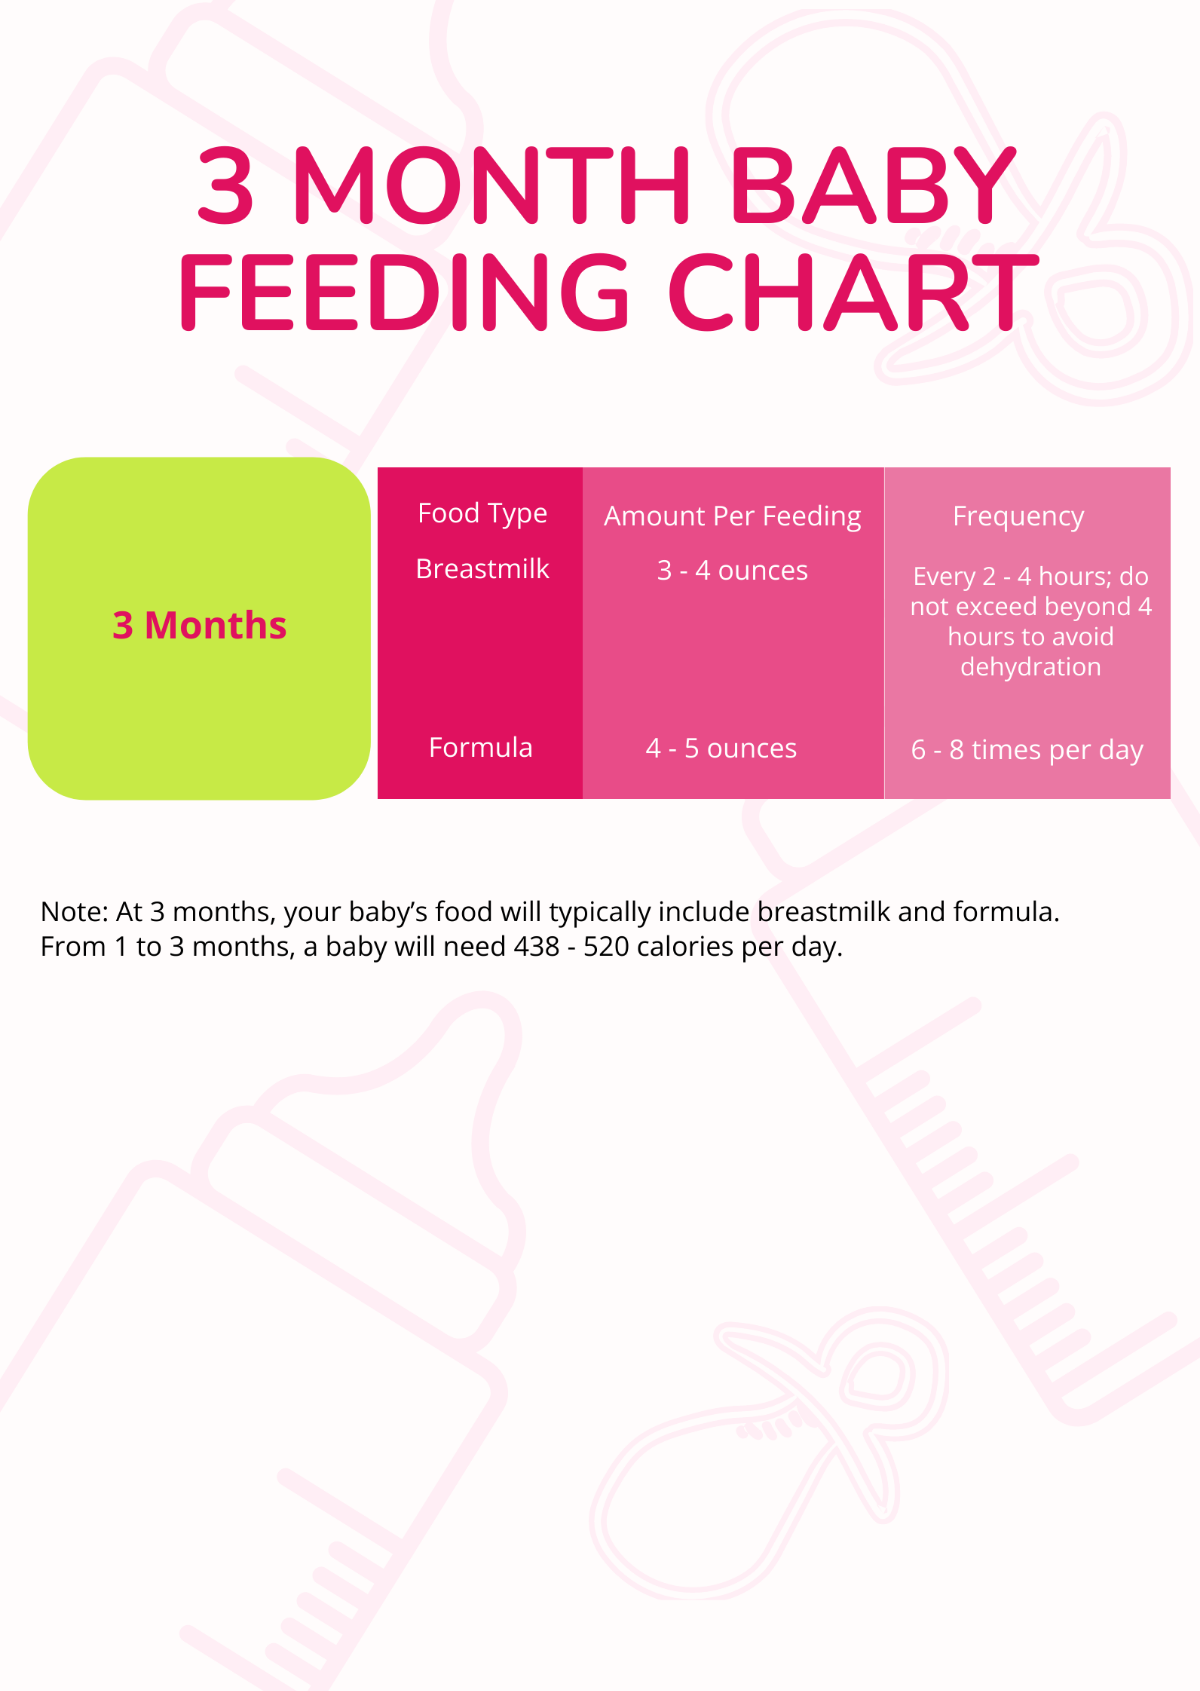 3 Month Baby Feeding Chart Template